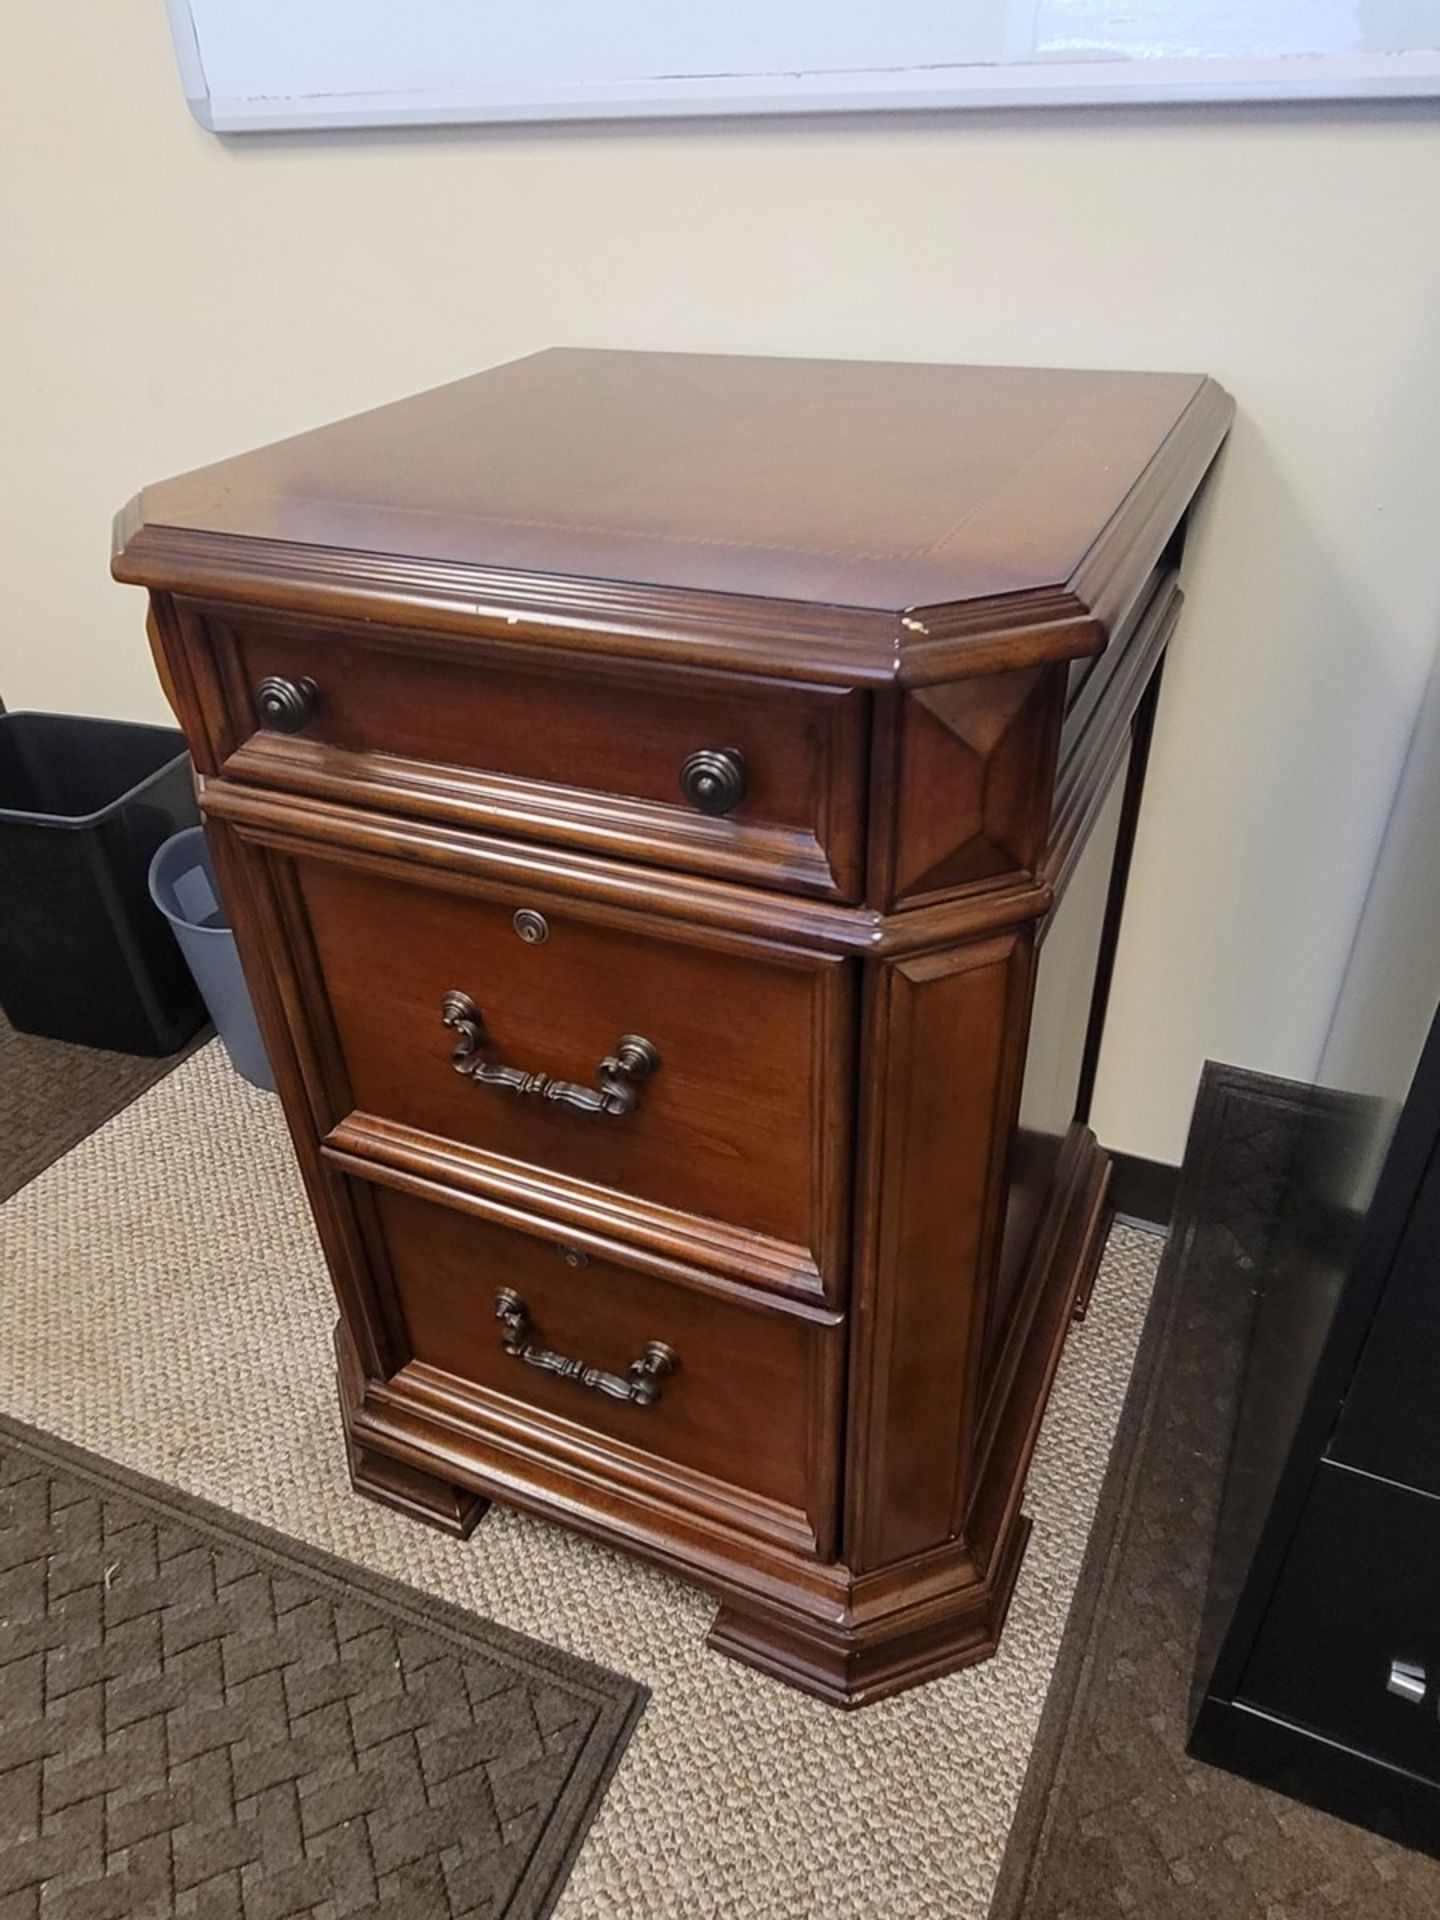 Executive Office Furniture - Image 5 of 10